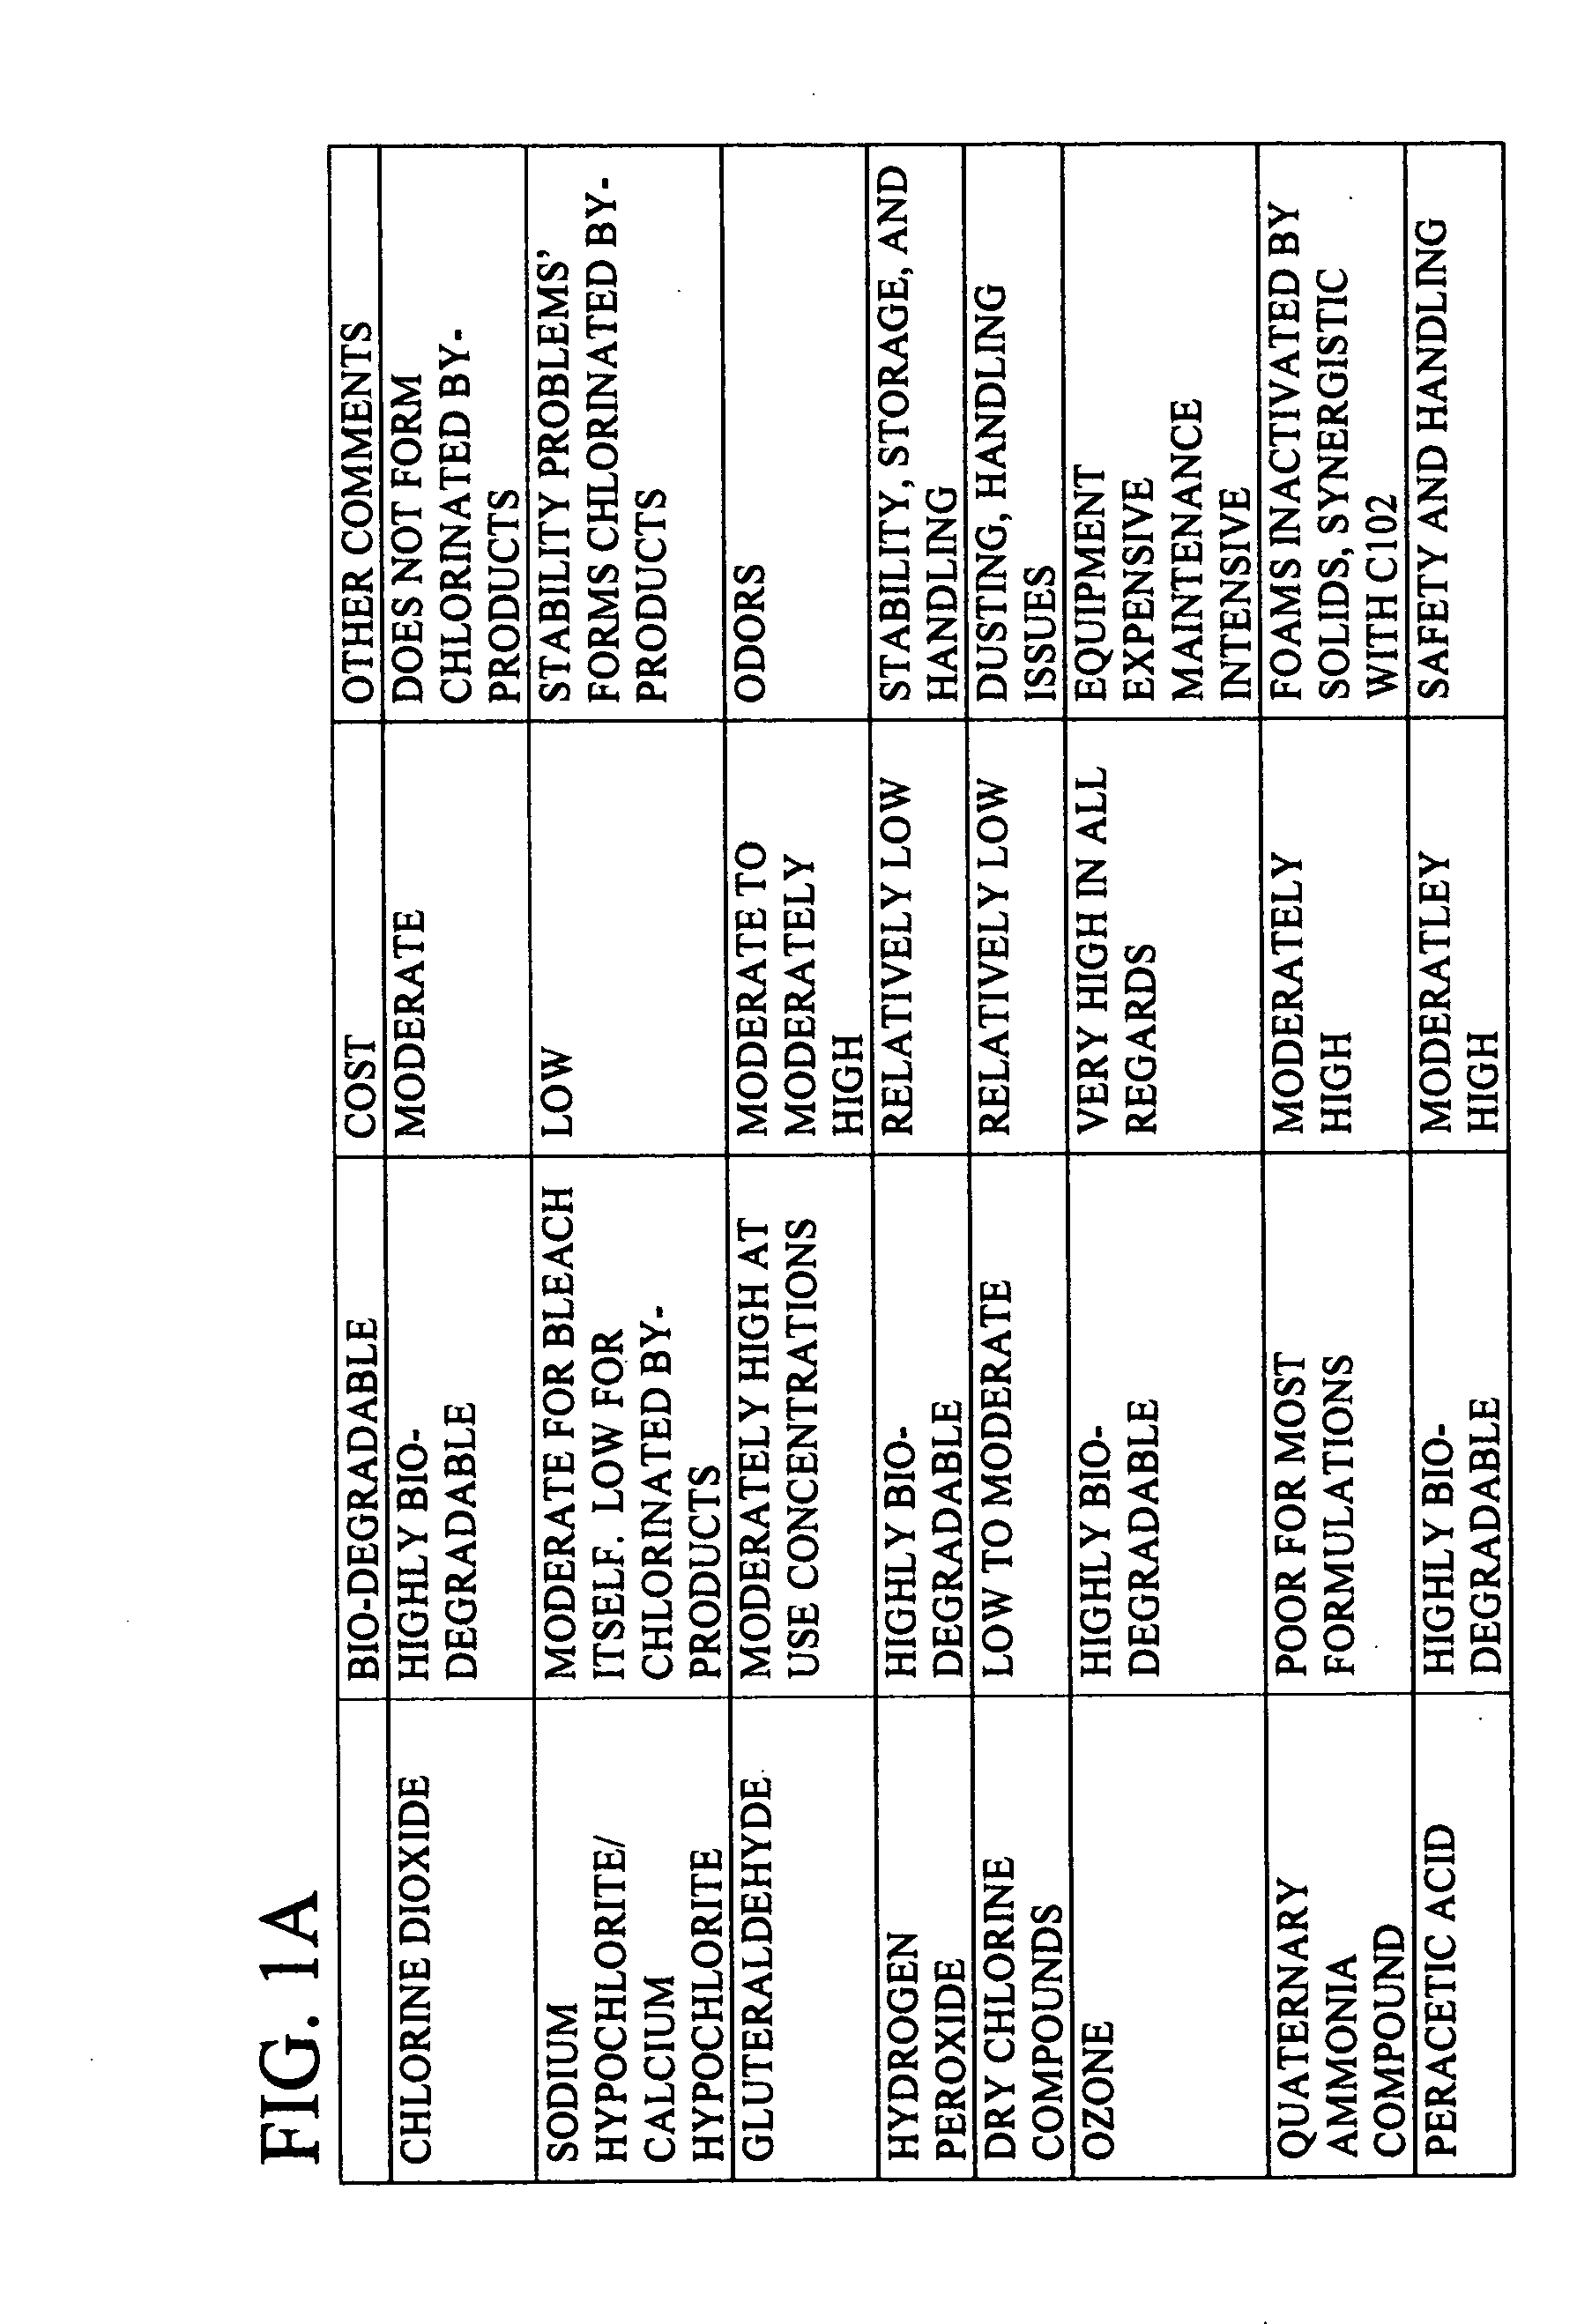 Methods, apparatus, and compositions for controlling organisms in ballast water